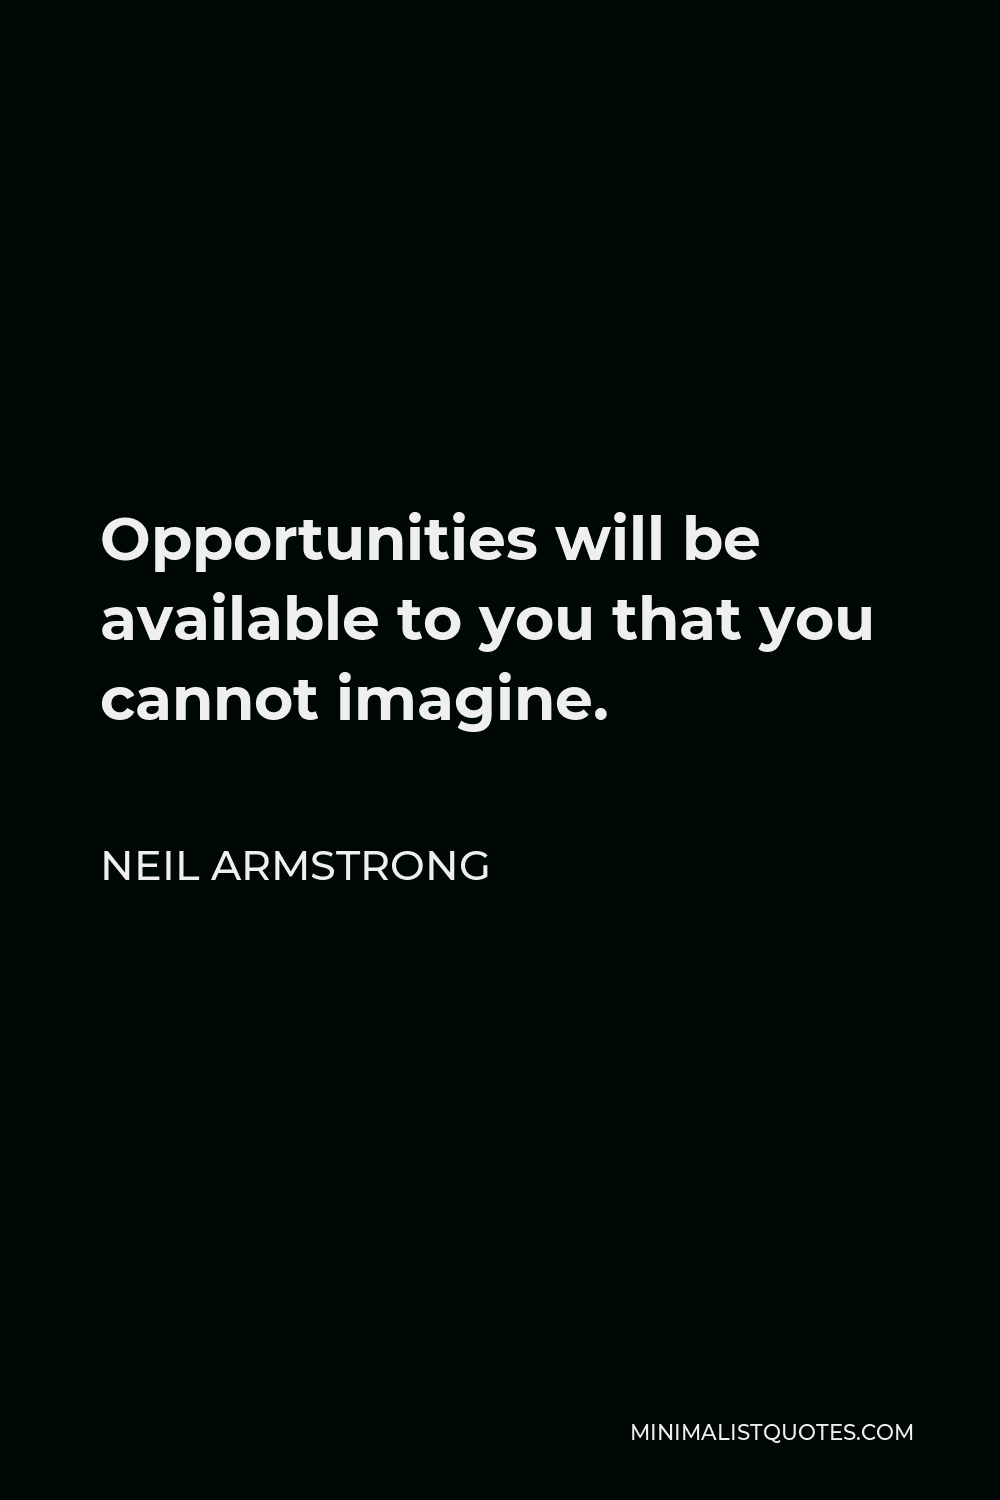 Neil Armstrong Quote - Opportunities will be available to you that you cannot imagine.